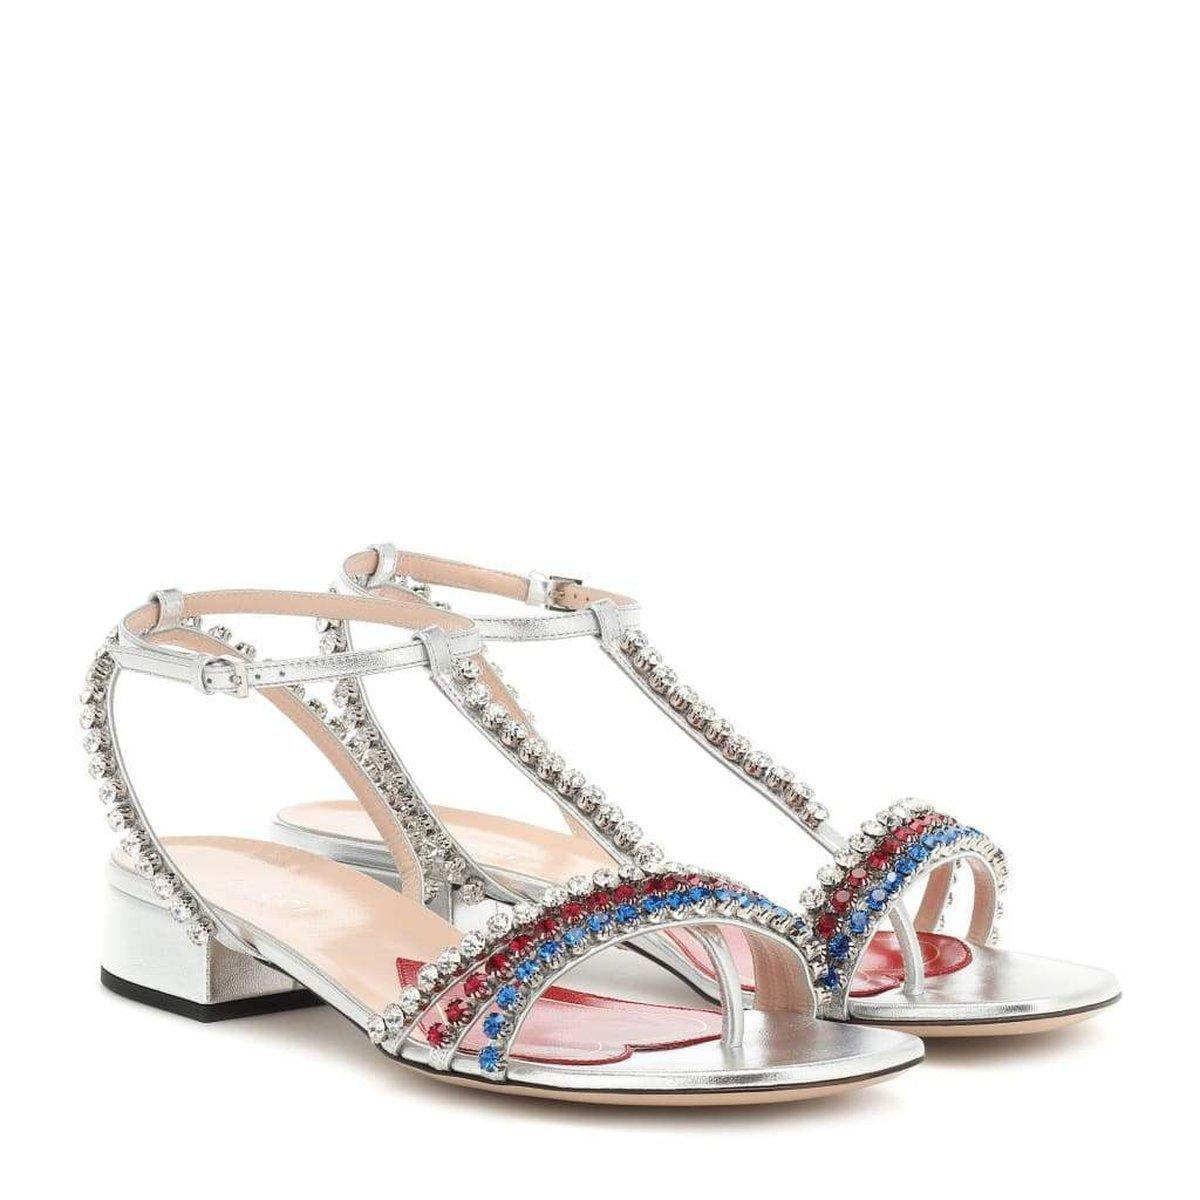 Women's Gucci Bertie Embellished Metallic Leather Sandals IT 38 For Sale